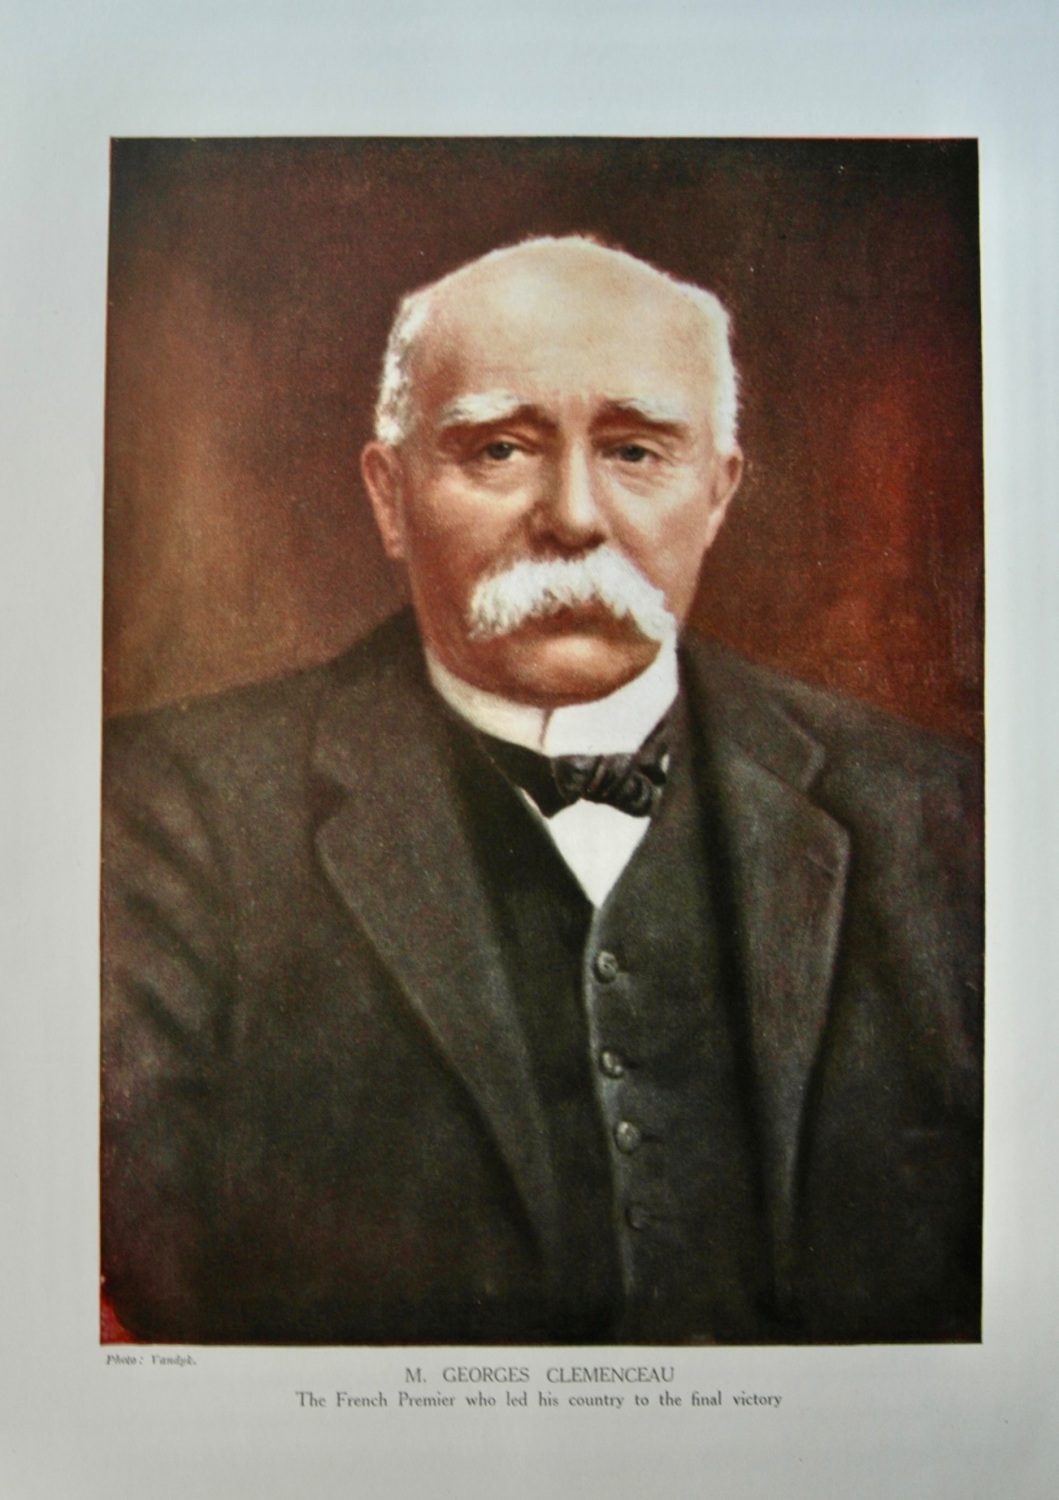 M. Georges Clemenceau.  The French Premier who led his country to the final